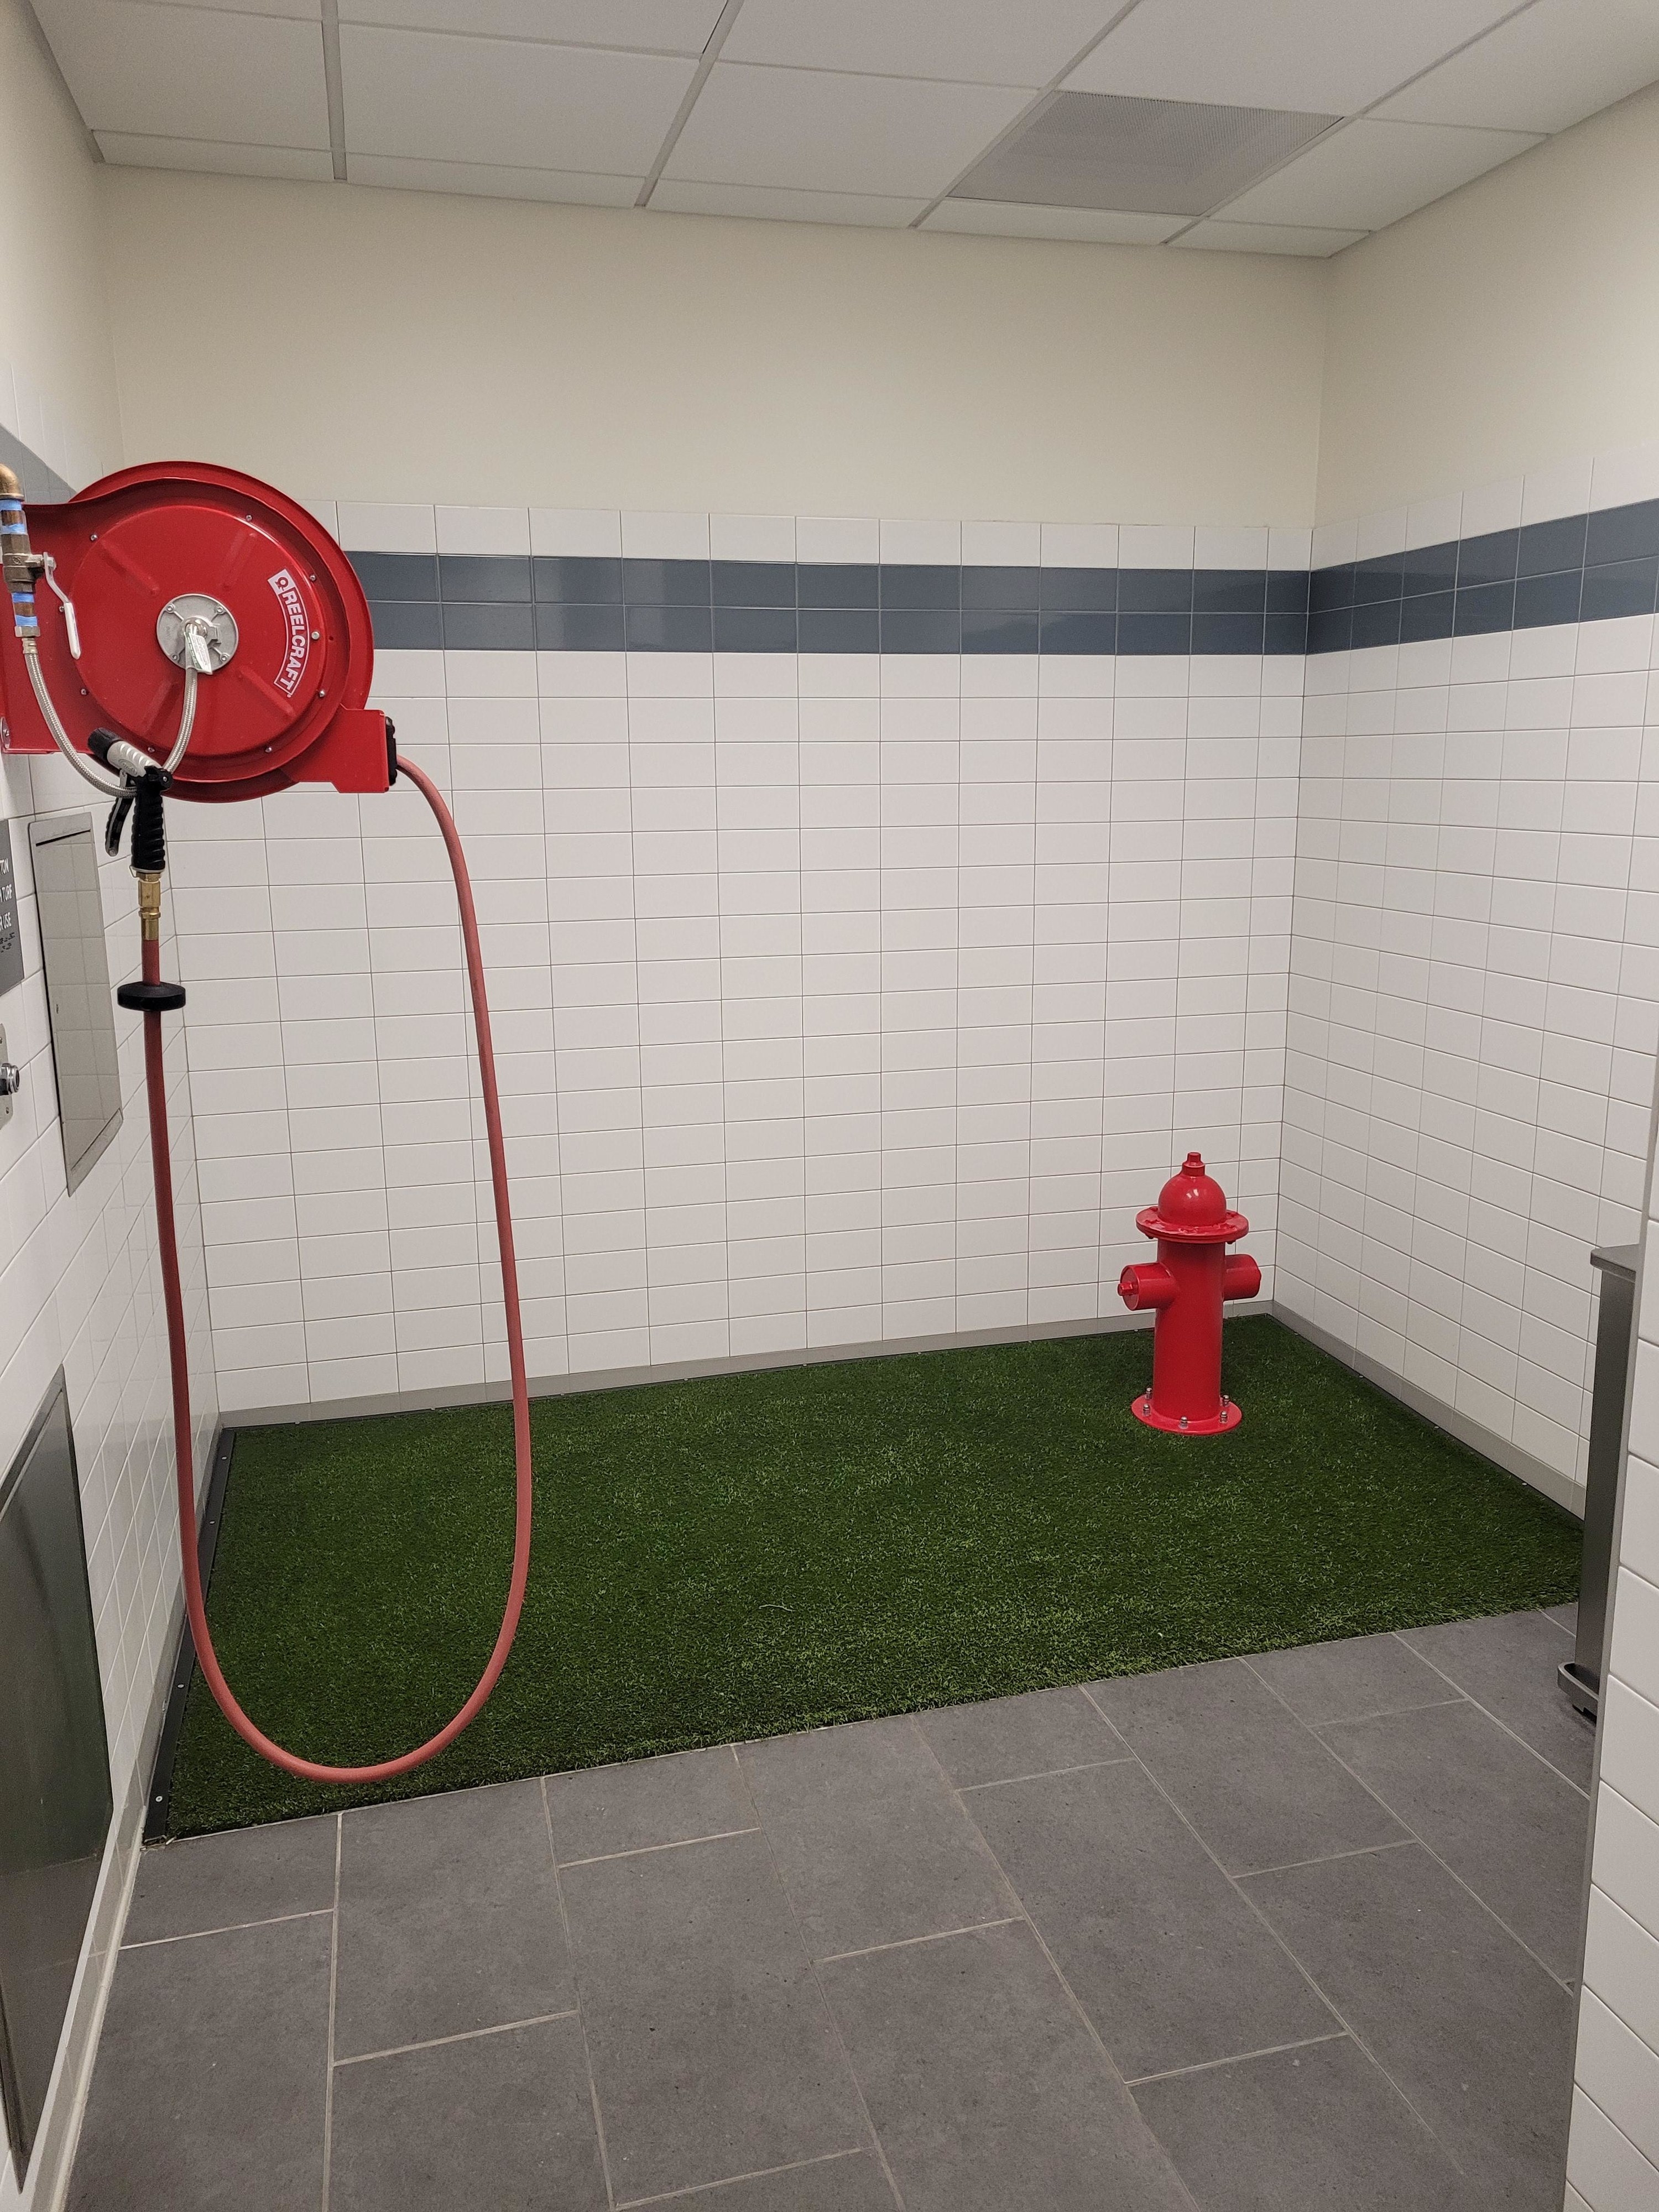 A rectangular grassy-looking space in a bathroom with a fire hydrant, surrounded by tiles